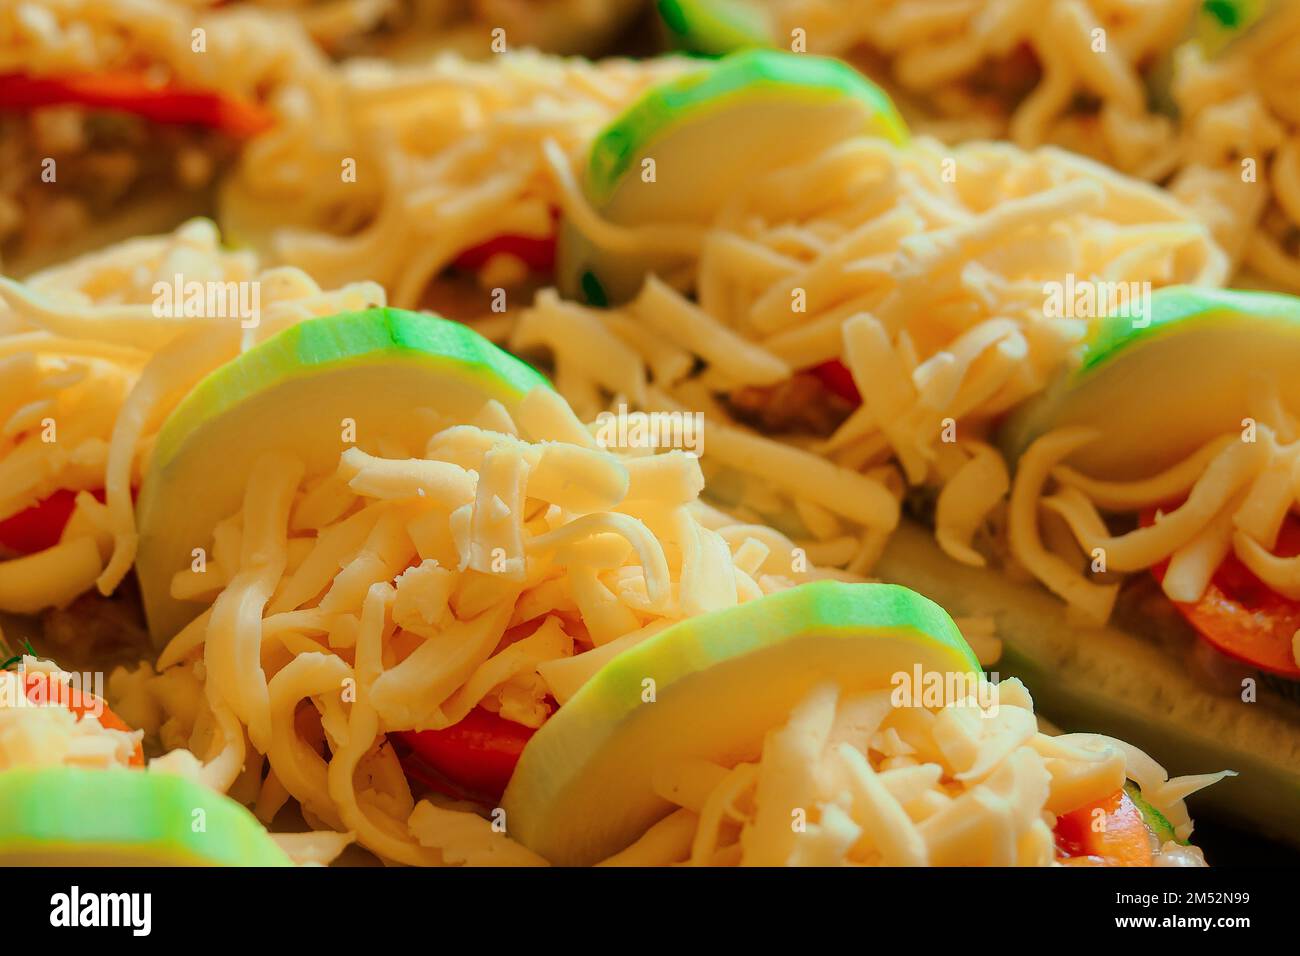 Stuffed zucchini with minced meat, tomatoes and cheese. Close-up top view. Healthy food. Recipe delicious food at home. Stock Photo